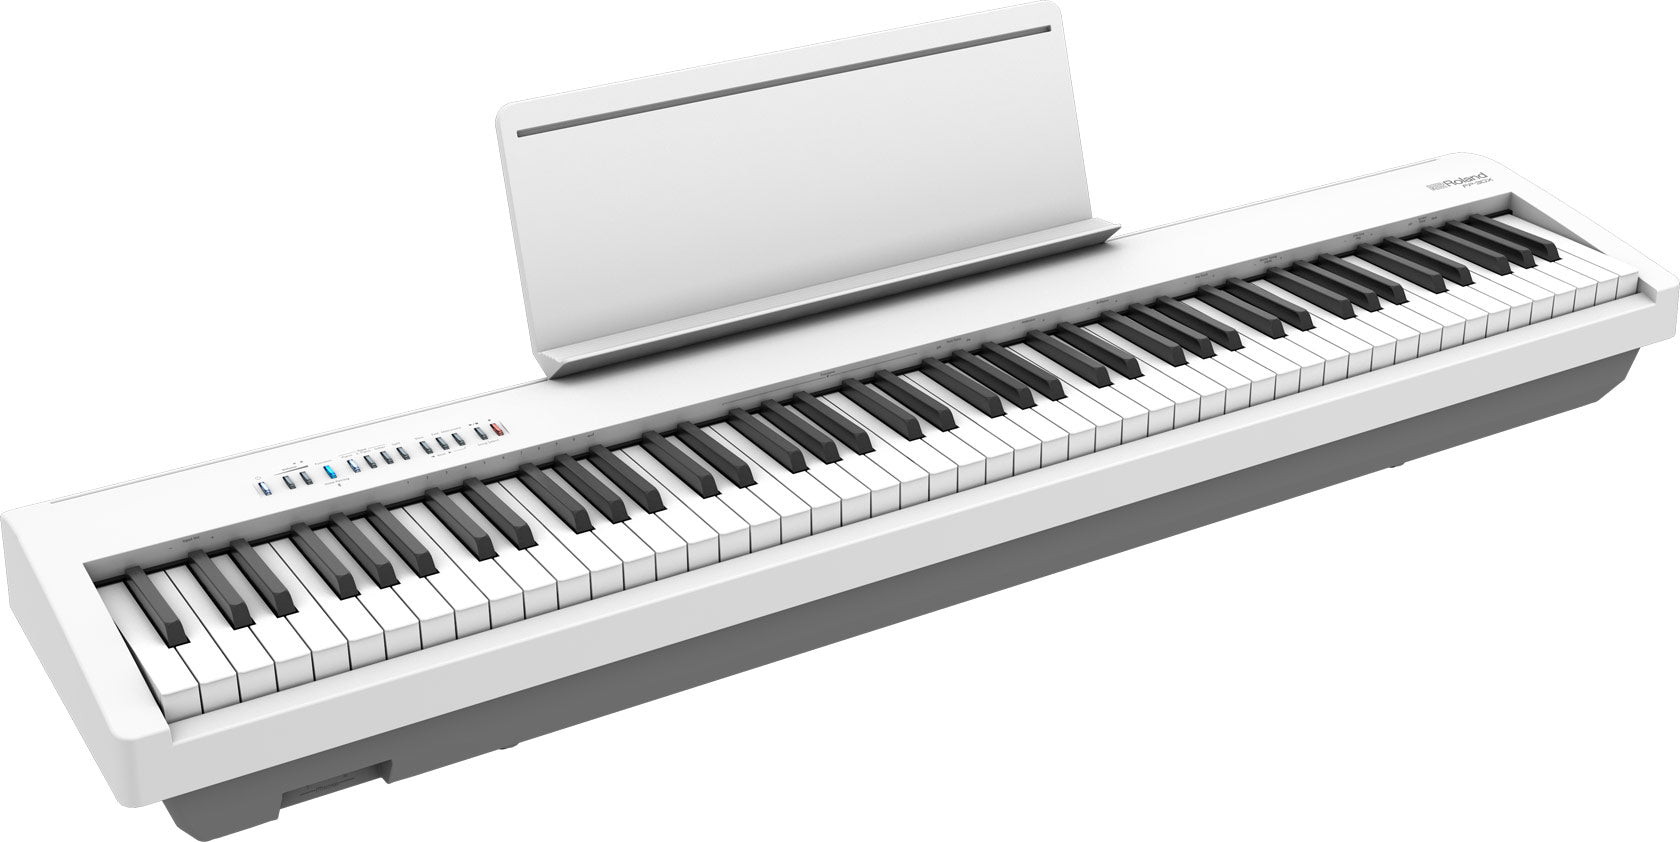 Roland FP-30X 88-key Digital Piano with Wood Stand & Tri Pedal Free RH-5 Headphone and Piano Bench - White (FP30X / FP 30X), ROLAND, DIGITAL PIANO, roland-digital-piano-fp30x-wh, ZOSO MUSIC SDN BHD